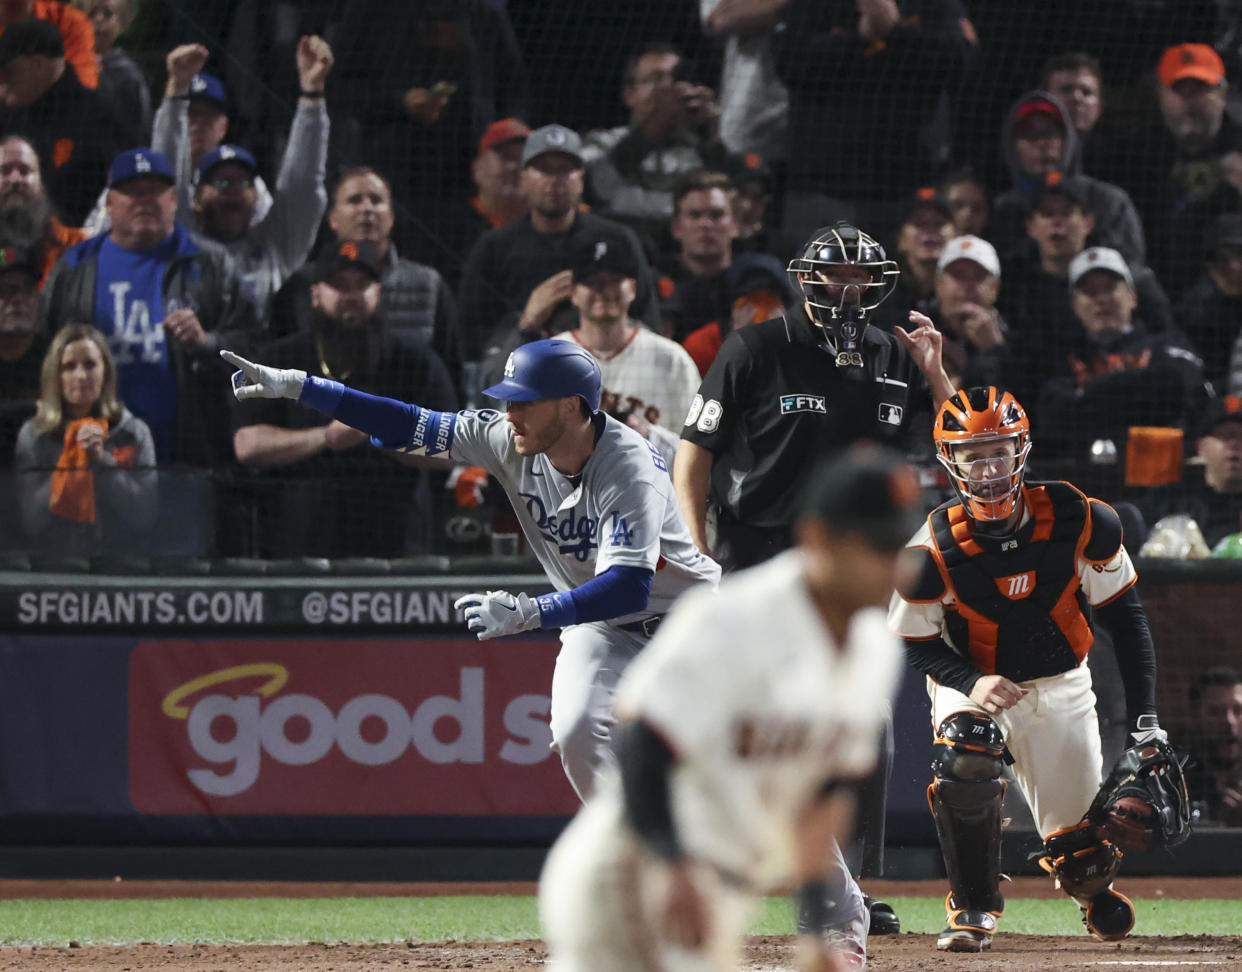 Dodgers first baseman Cody Bellinger raises his arm in excitement after hitting the go-ahead RBI single against the Giants.